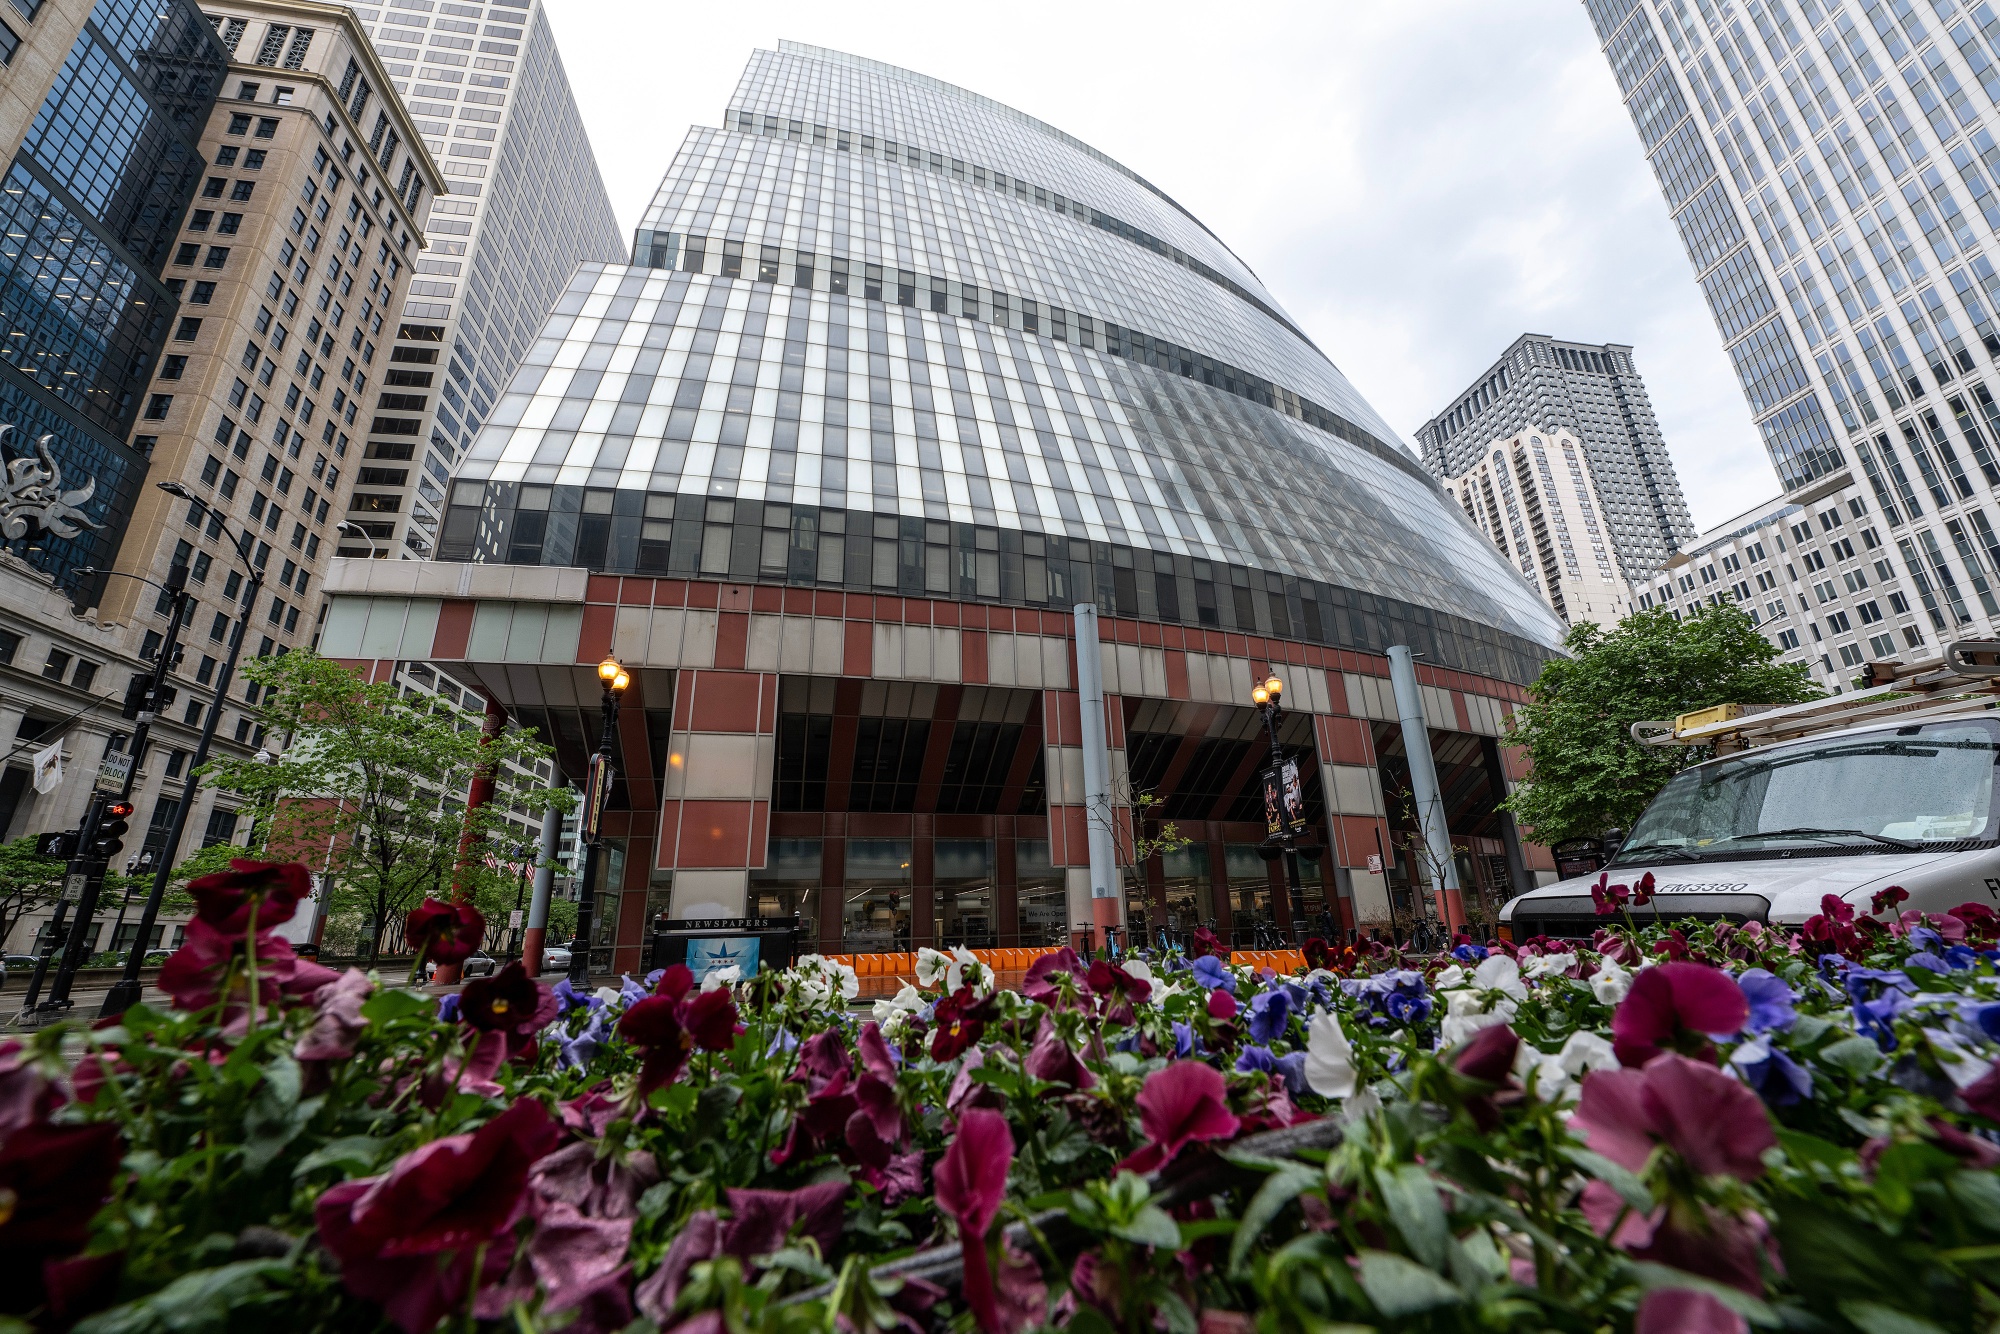 Chicago's Magnificent Mile Needs Crowds to Come Back - Bloomberg